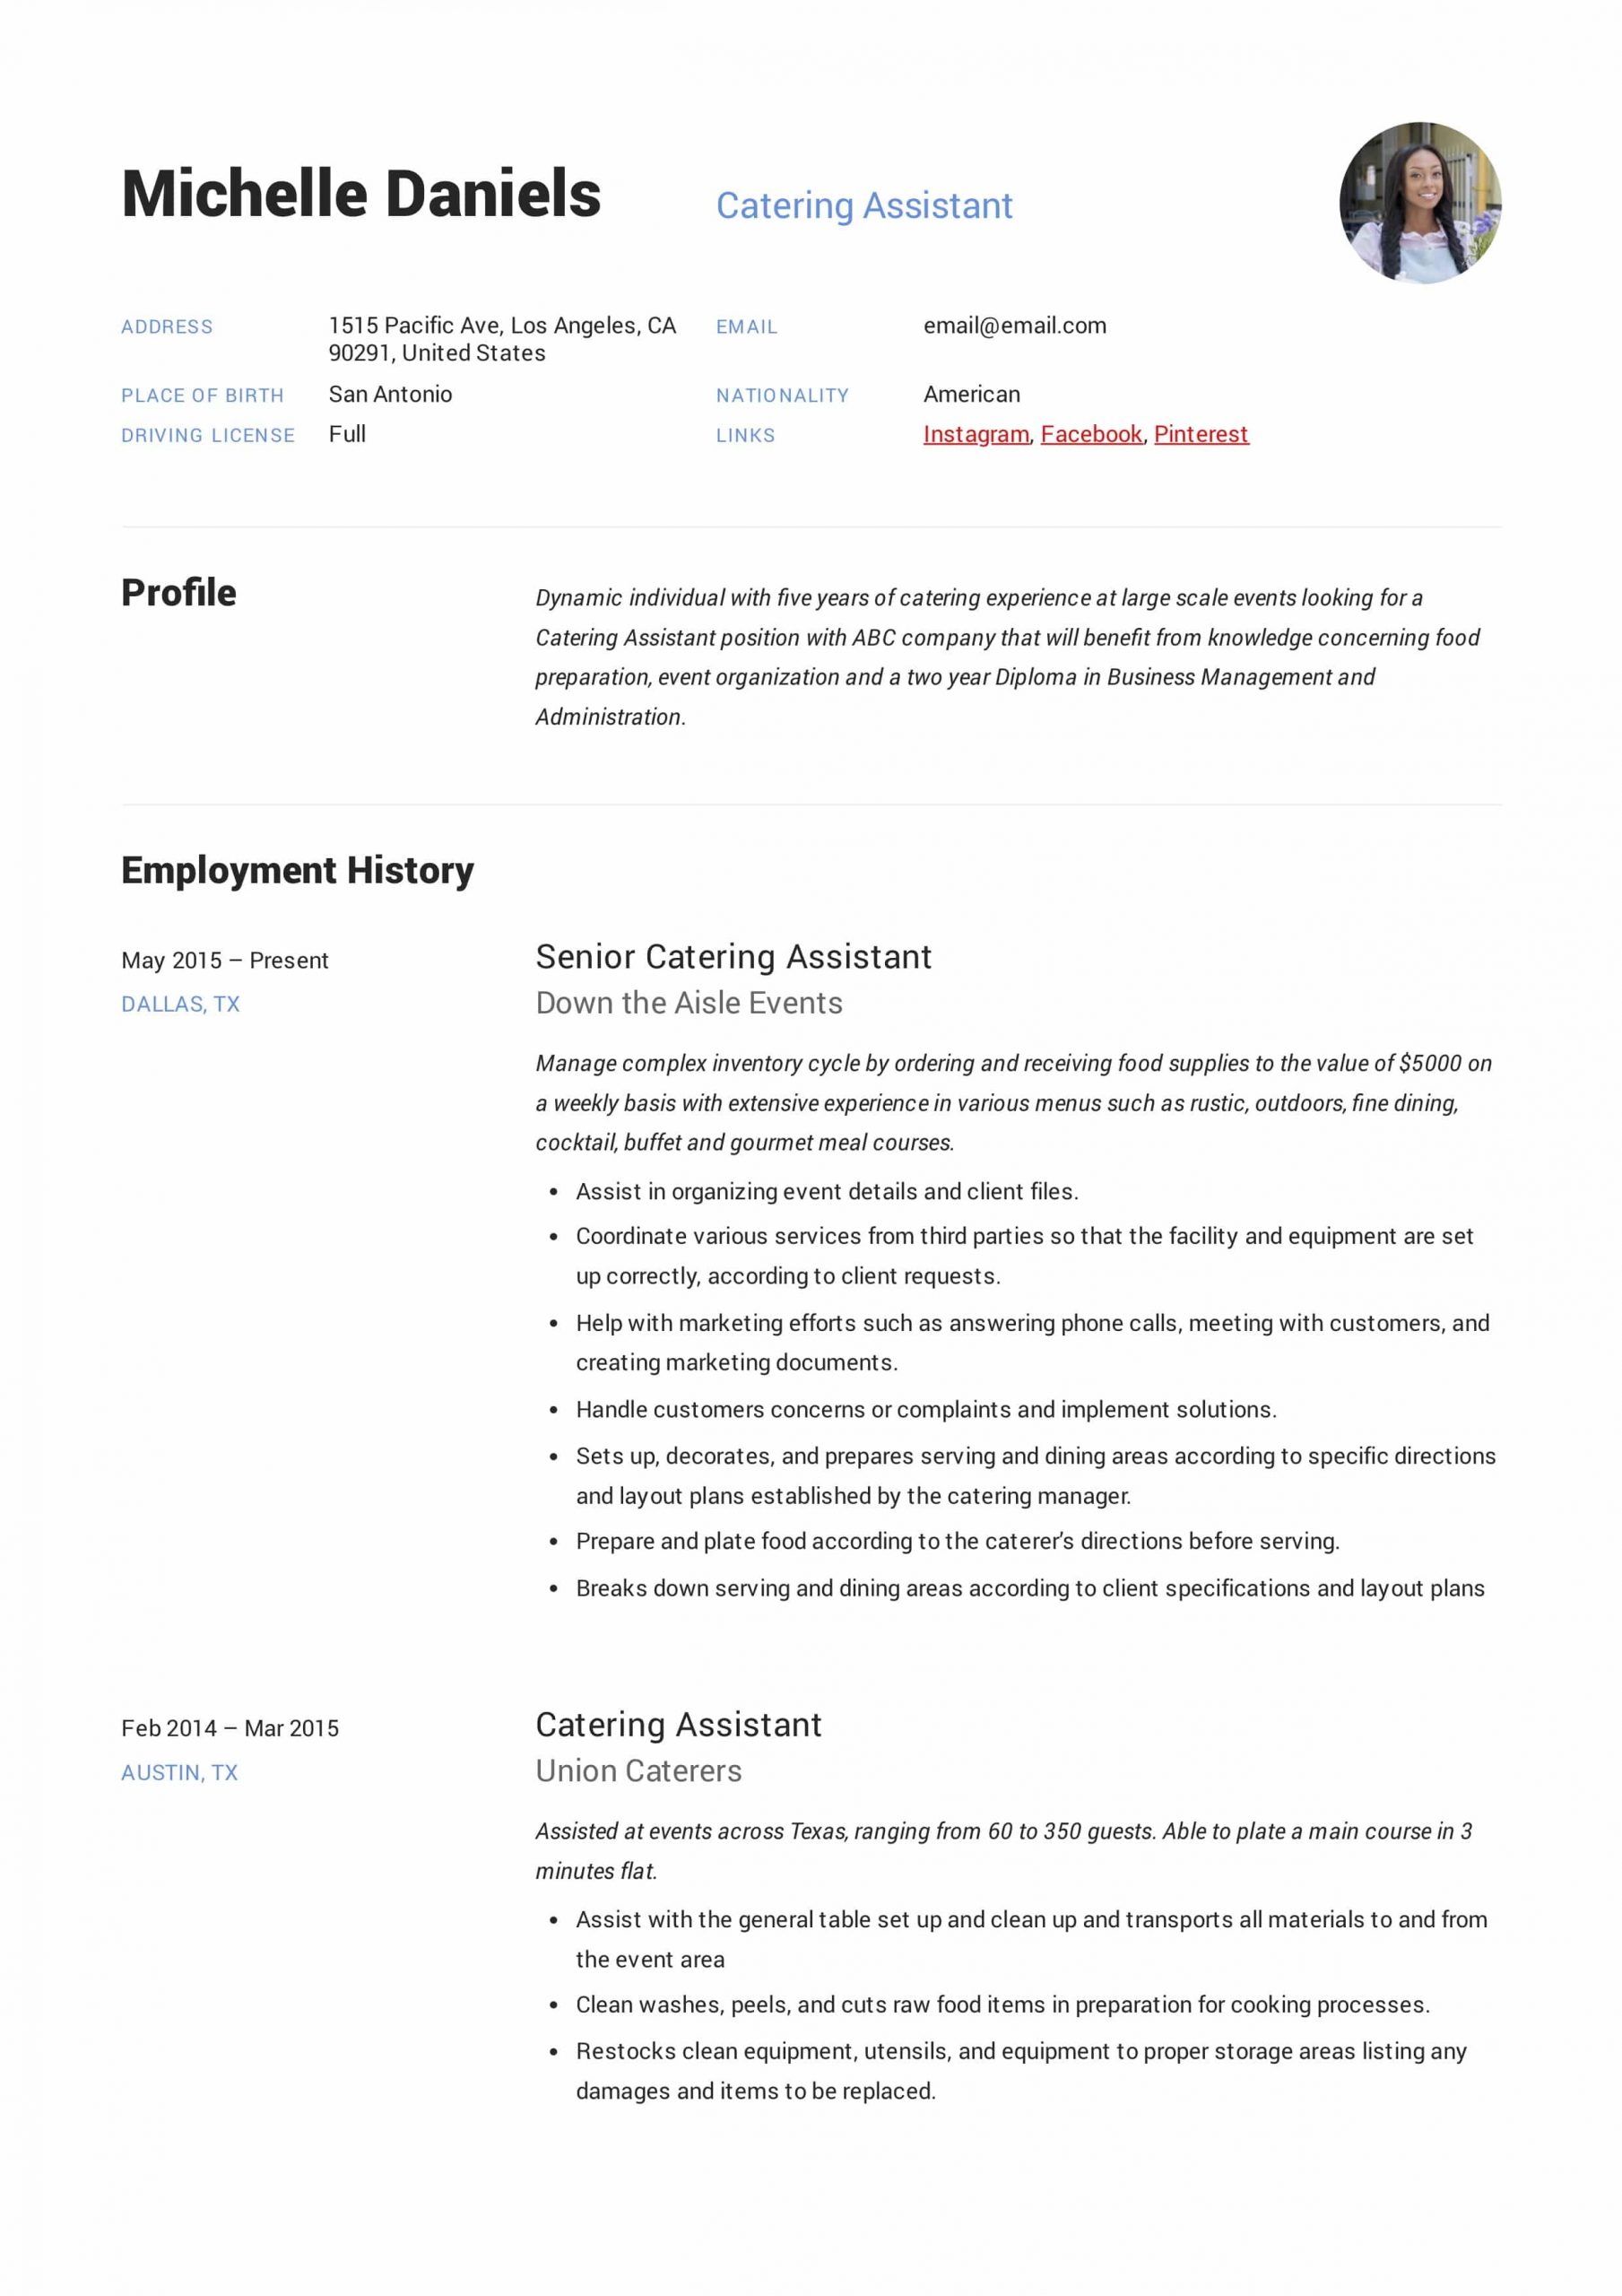 Guide Catering Assistant Resume [ 12 Samples ]